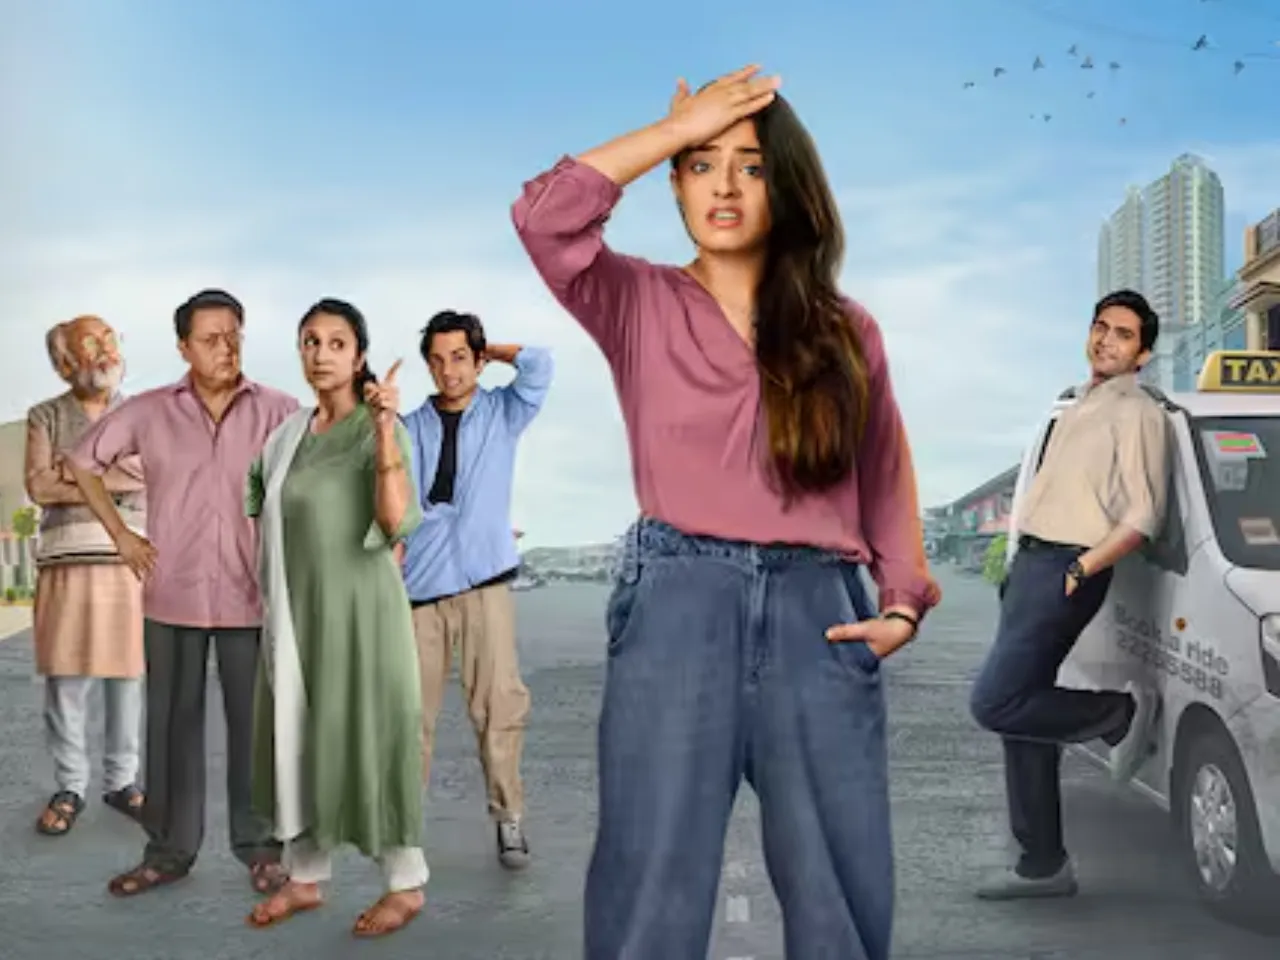 Family Aaj Kal review: A relatable middle class family drama that calls out hypocrisy